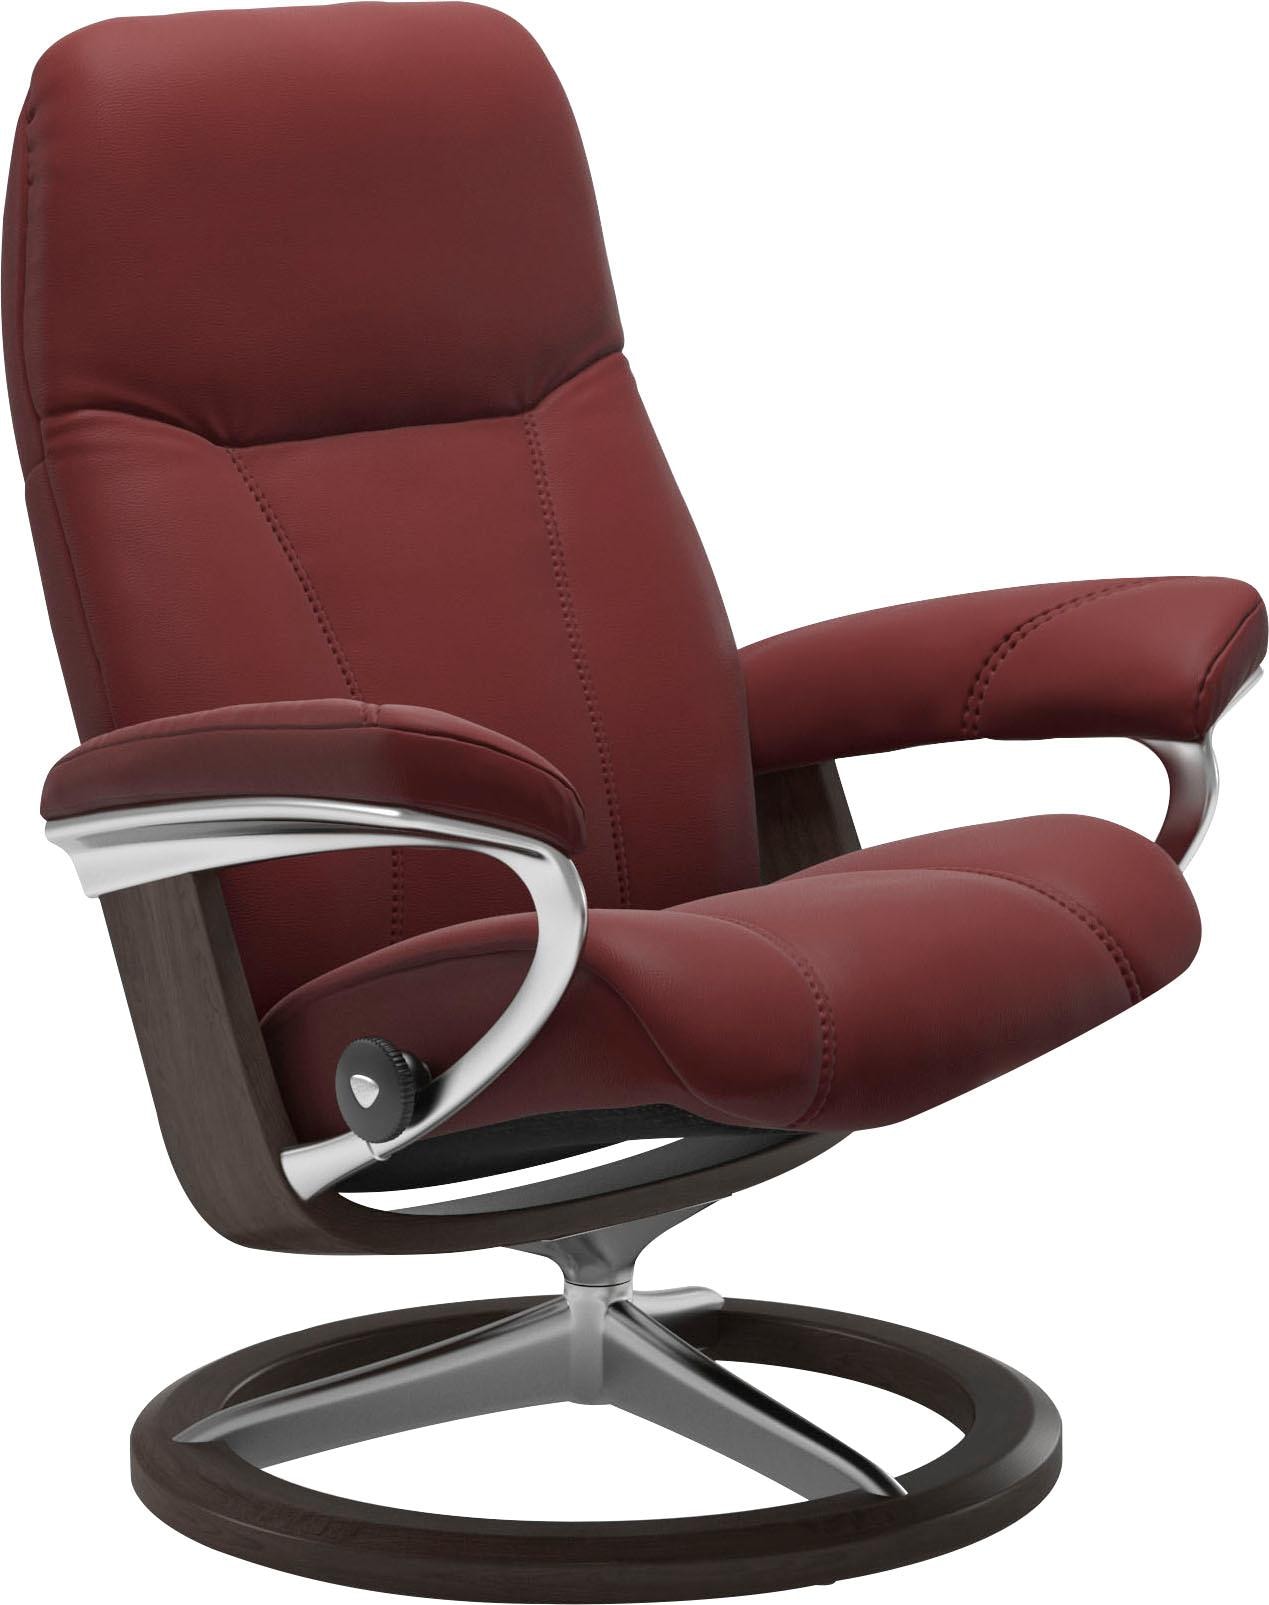 Stressless® Relaxsessel »Consul«, mit Signature Base, Größe S, Gestell Wenge